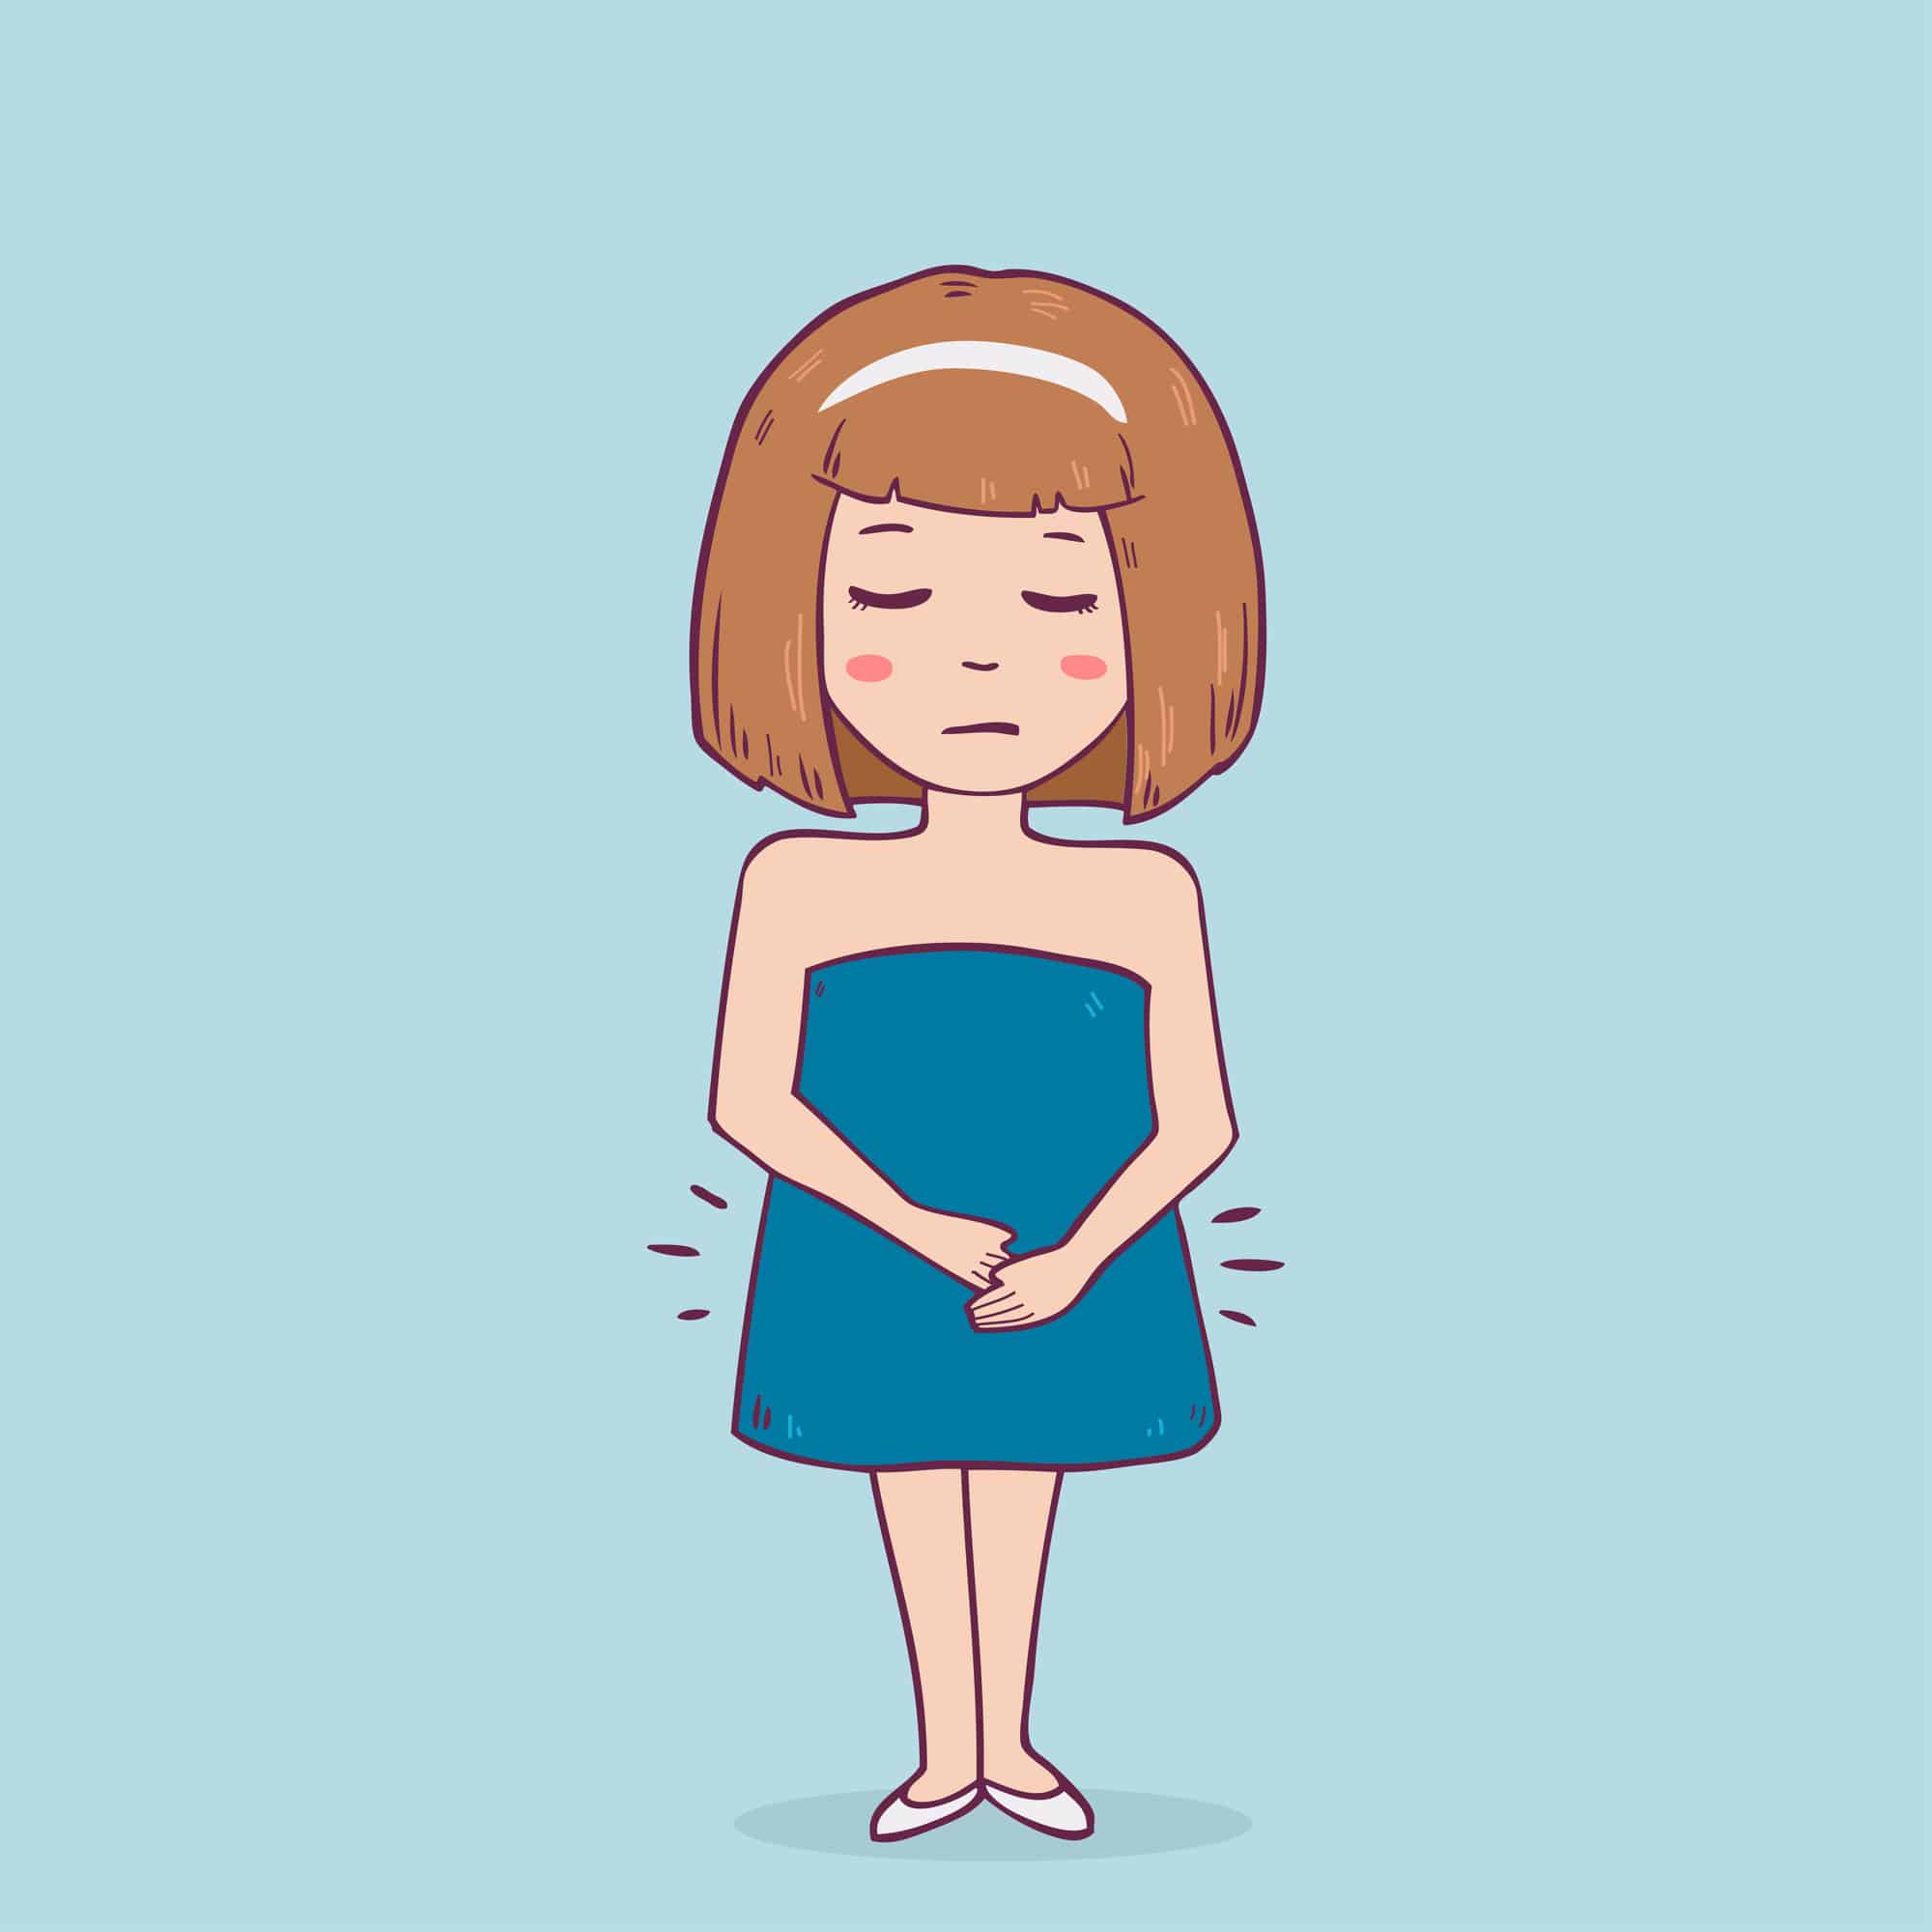 Is It Normal To Have Abdominal Pain After Pregnancy?